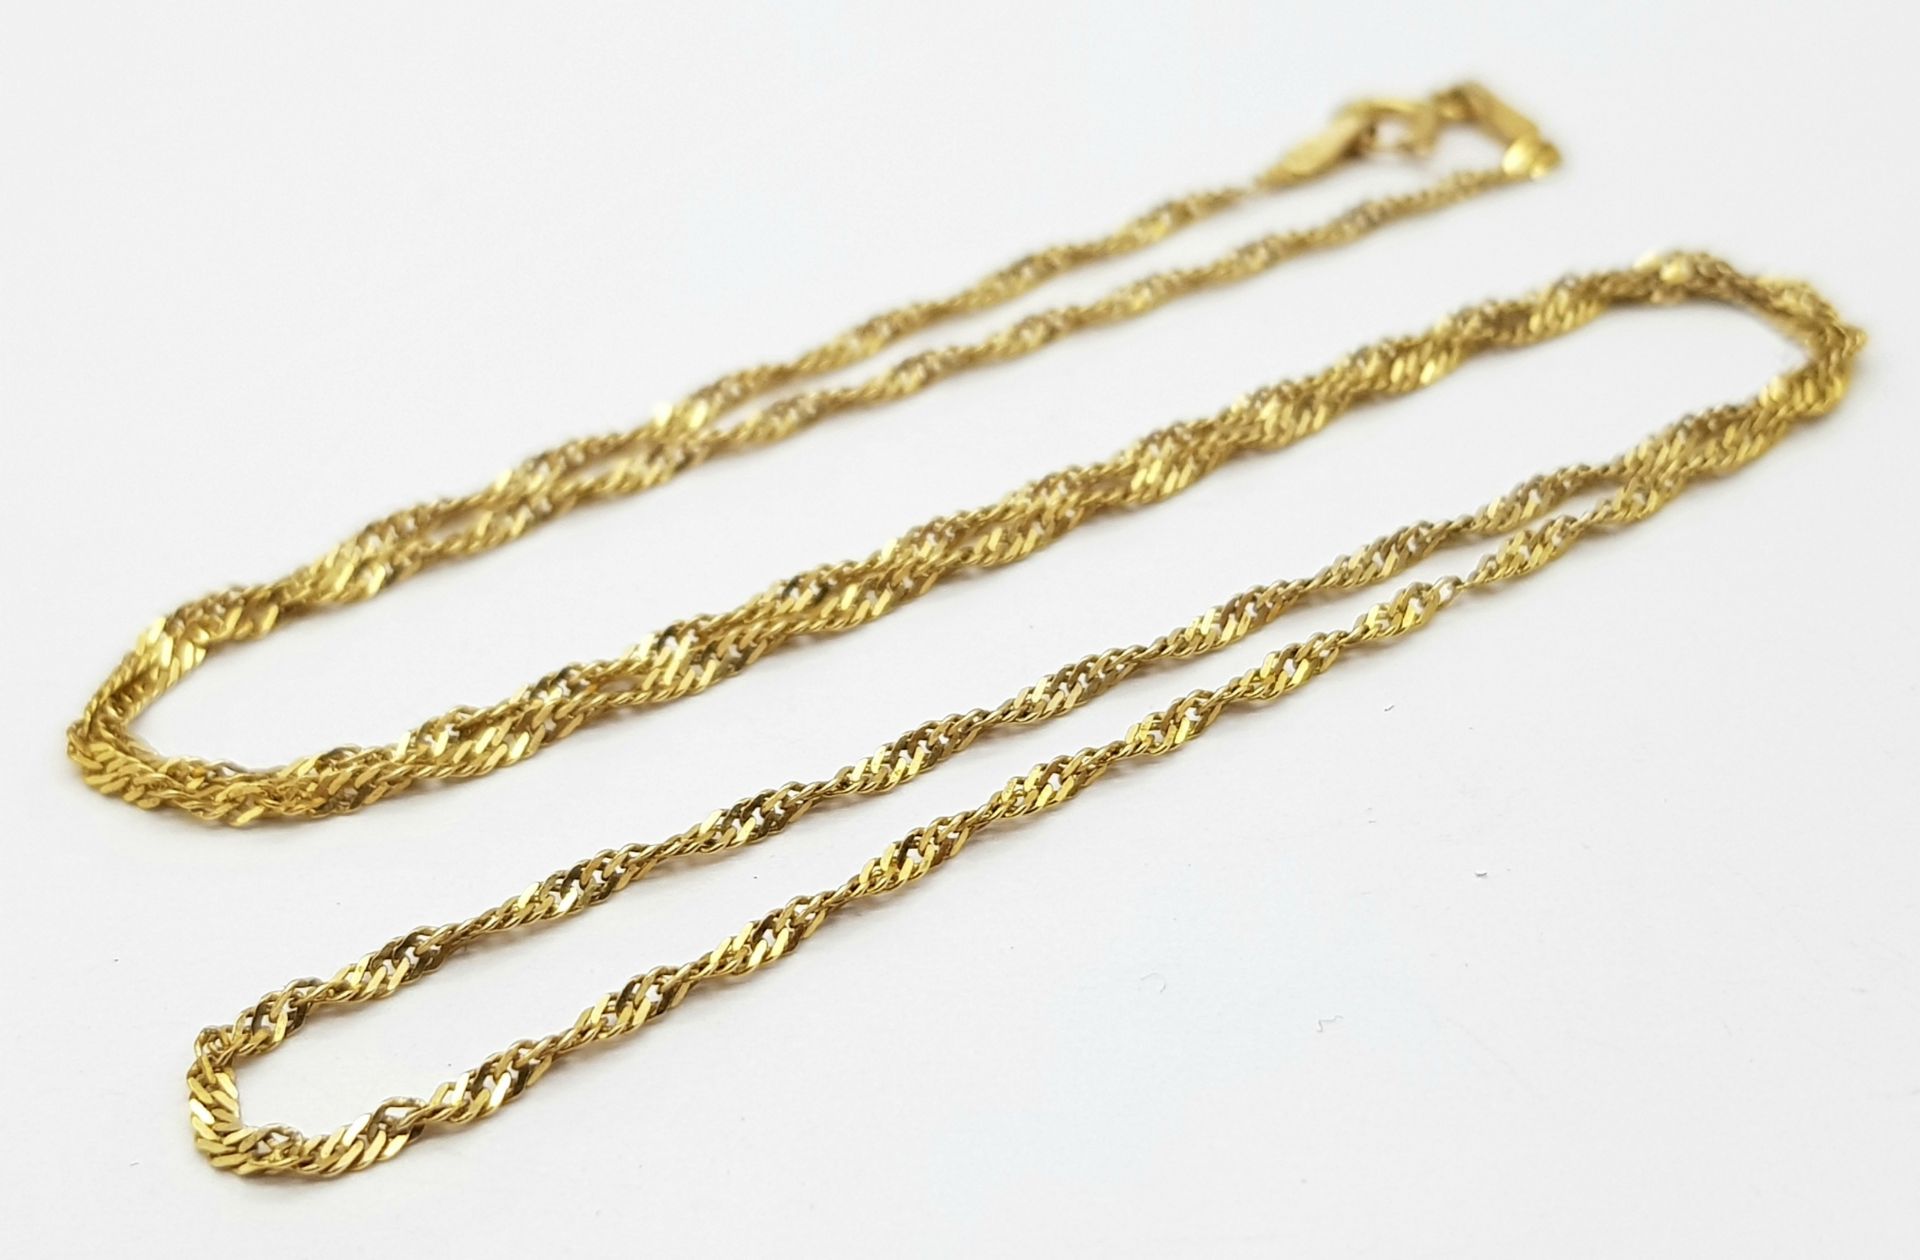 A 9K Yellow Gold Small Twist Curb Link Necklace. 44cm. 1.75g - Image 2 of 5